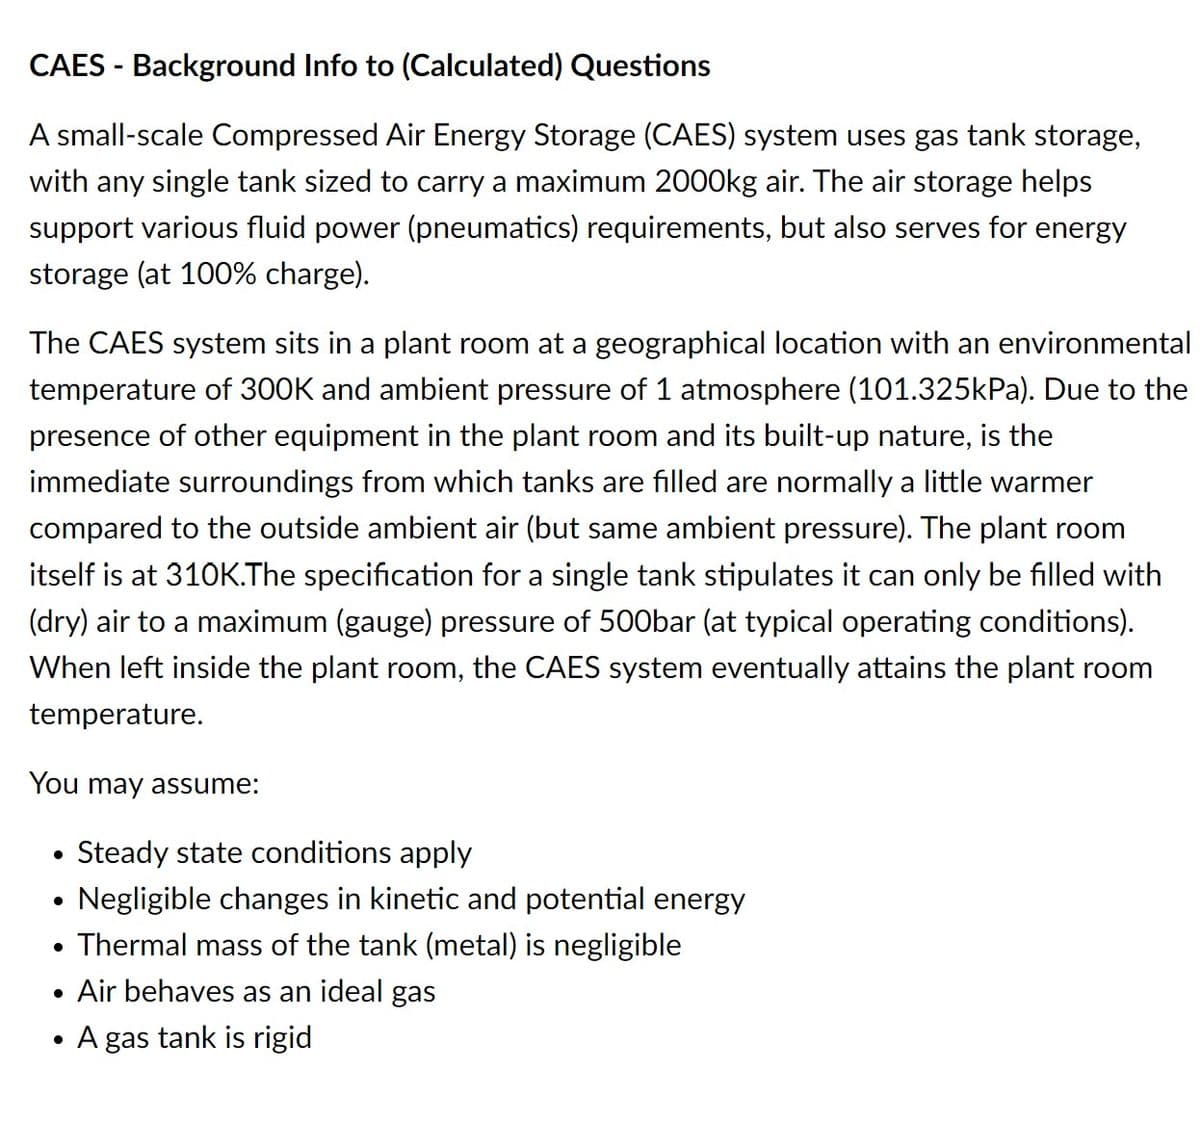 CAES-Background Info to (Calculated) Questions
A small-scale Compressed Air Energy Storage (CAES) system uses gas tank storage,
with any single tank sized to carry a maximum 2000kg air. The air storage helps
support various fluid power (pneumatics) requirements, but also serves for energy
storage (at 100% charge).
The CAES system sits in a plant room at a geographical location with an environmental
temperature of 300K and ambient pressure of 1 atmosphere (101.325kPa). Due to the
presence of other equipment in the plant room and its built-up nature, is the
immediate surroundings from which tanks are filled are normally a little warmer
compared to the outside ambient air (but same ambient pressure). The plant room
itself is at 310K.The specification for a single tank stipulates it can only be filled with
(dry) air to a maximum (gauge) pressure of 500bar (at typical operating conditions).
When left inside the plant room, the CAES system eventually attains the plant room
temperature.
You may assume:
Steady state conditions apply
Negligible changes in kinetic and potential energy
• Thermal mass of the tank (metal) is negligible
• Air behaves as an ideal gas
●
A gas tank is rigid